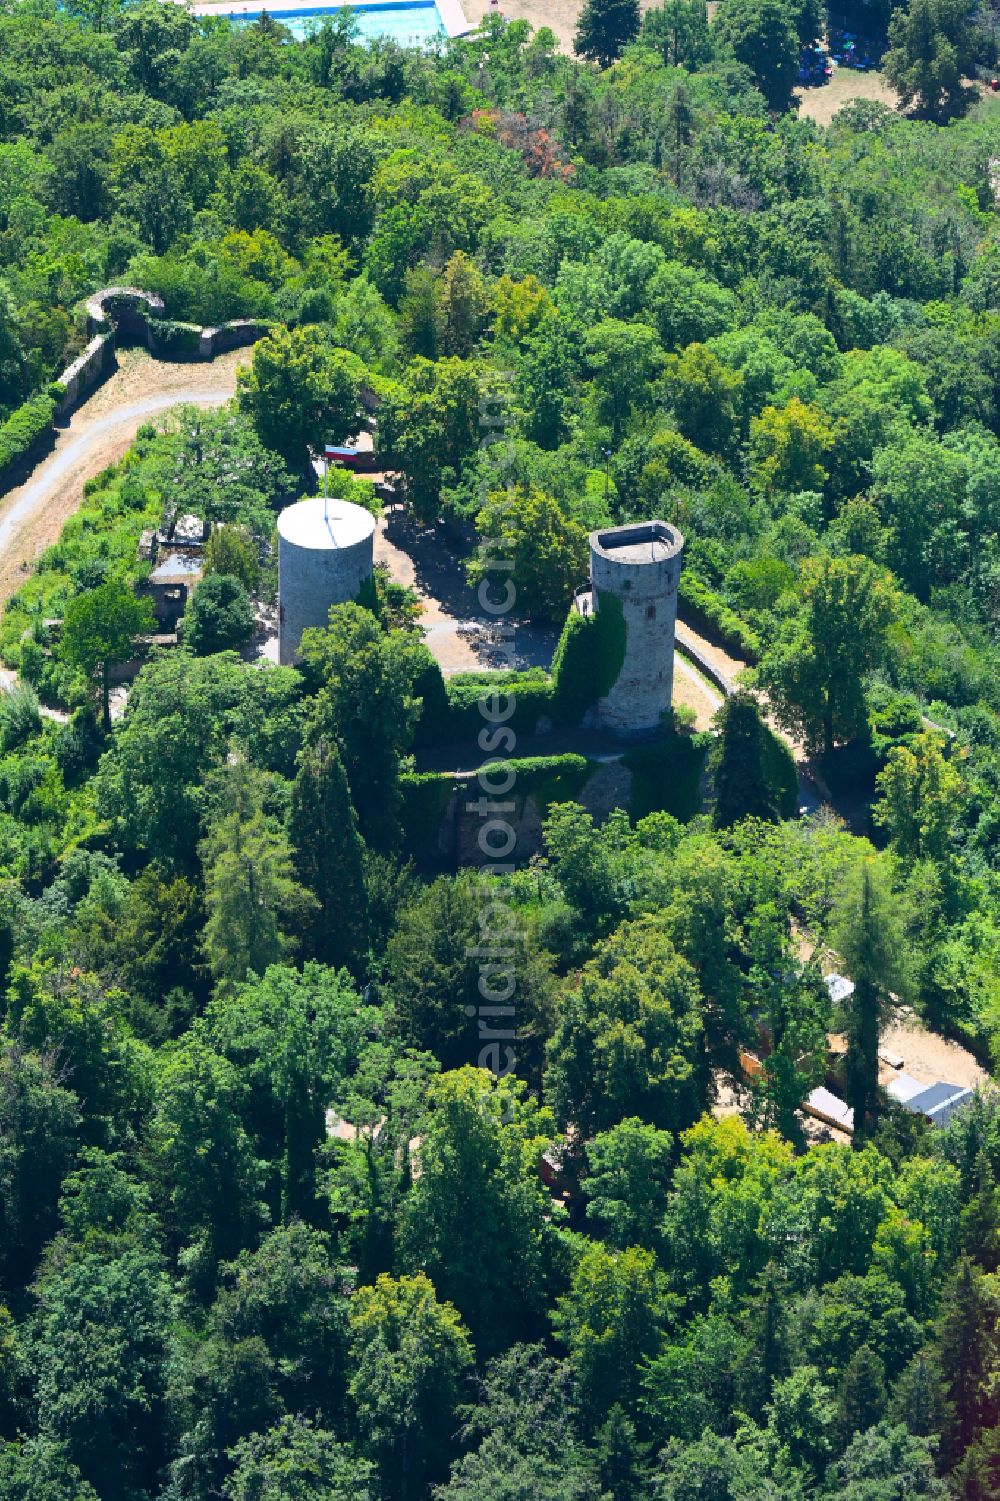 Nagold from above - Ruins and vestiges of the former castle Burgruine Hohennagold in Nagold in the state Baden-Wuerttemberg, Germany